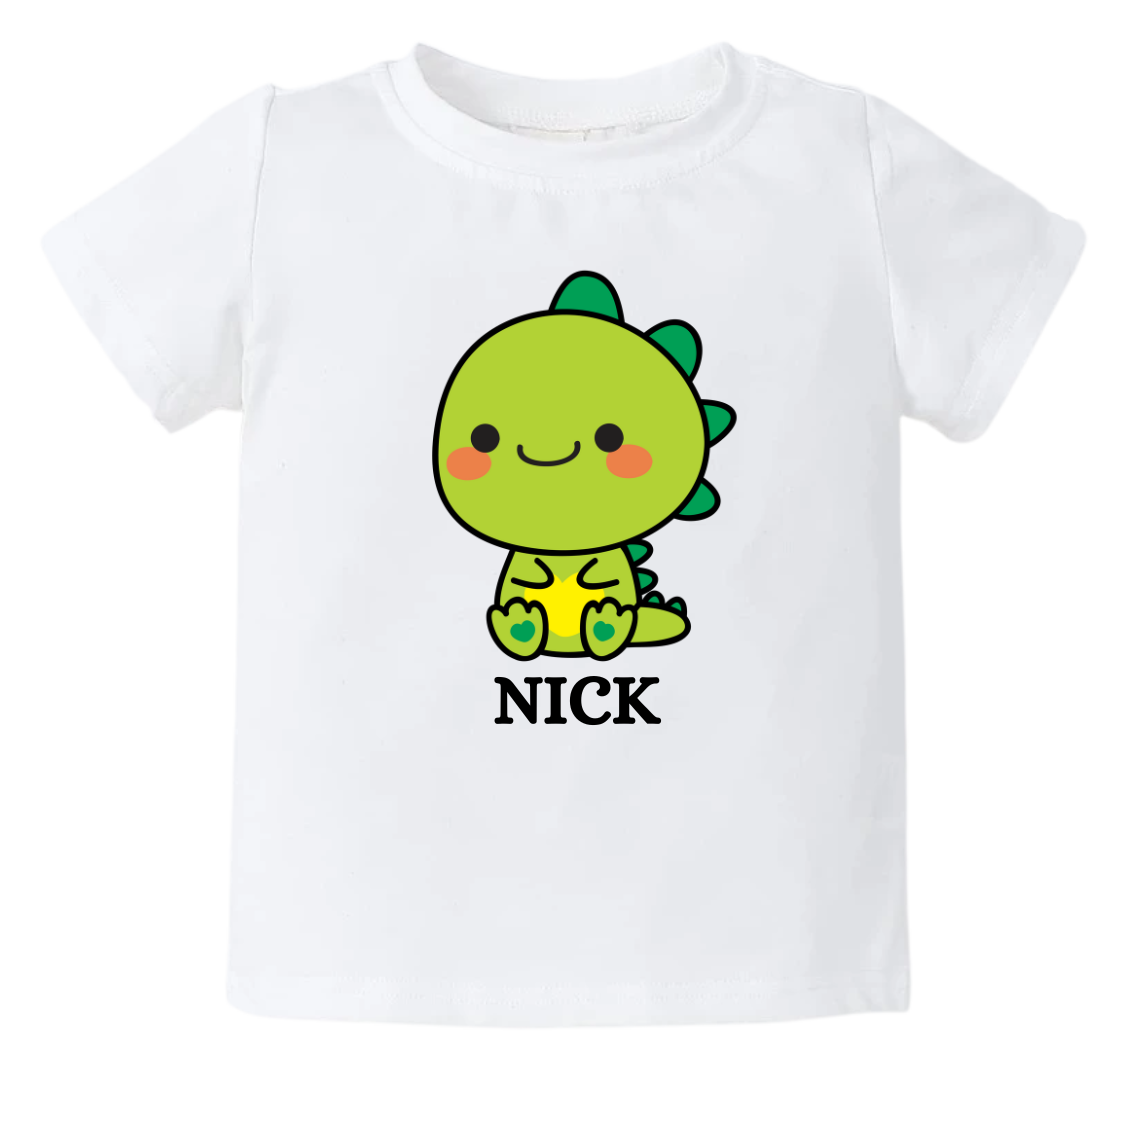 Kid's t-shirt and baby onesie with cute dinosaur design, customizable with names for a personal touch.